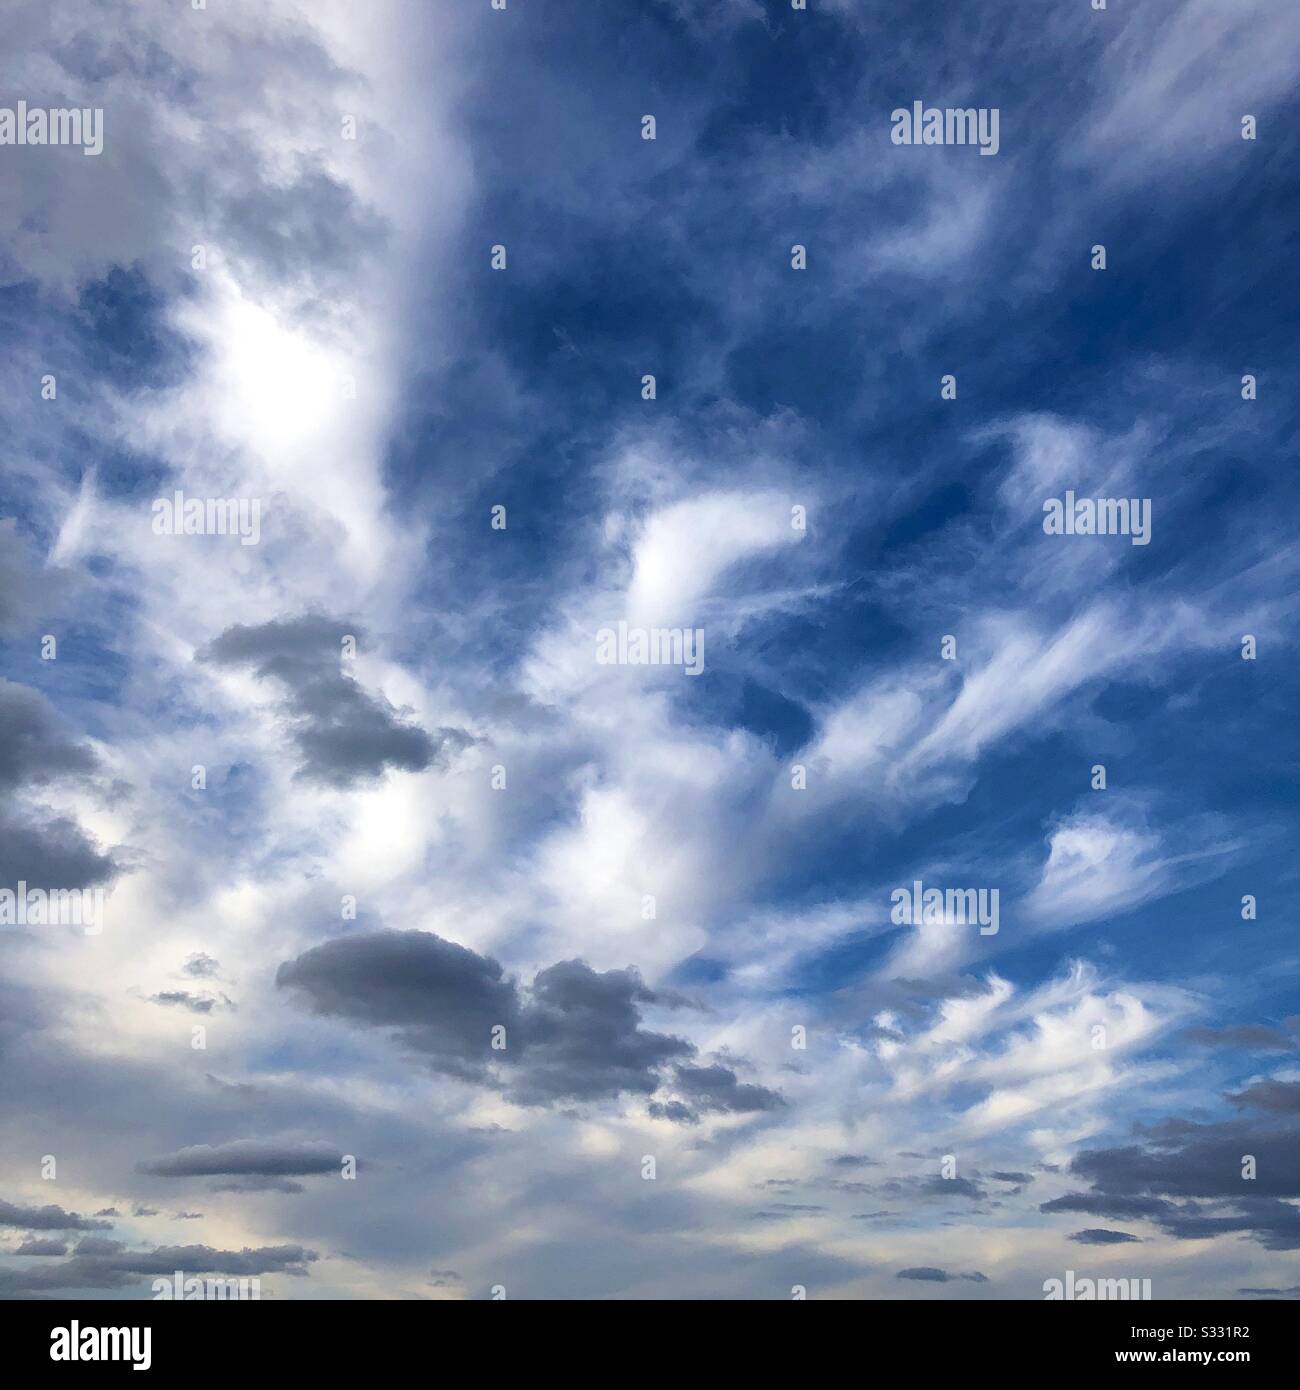 Cirrus and stratocumulus clouds against a blue sky. Stock Photo